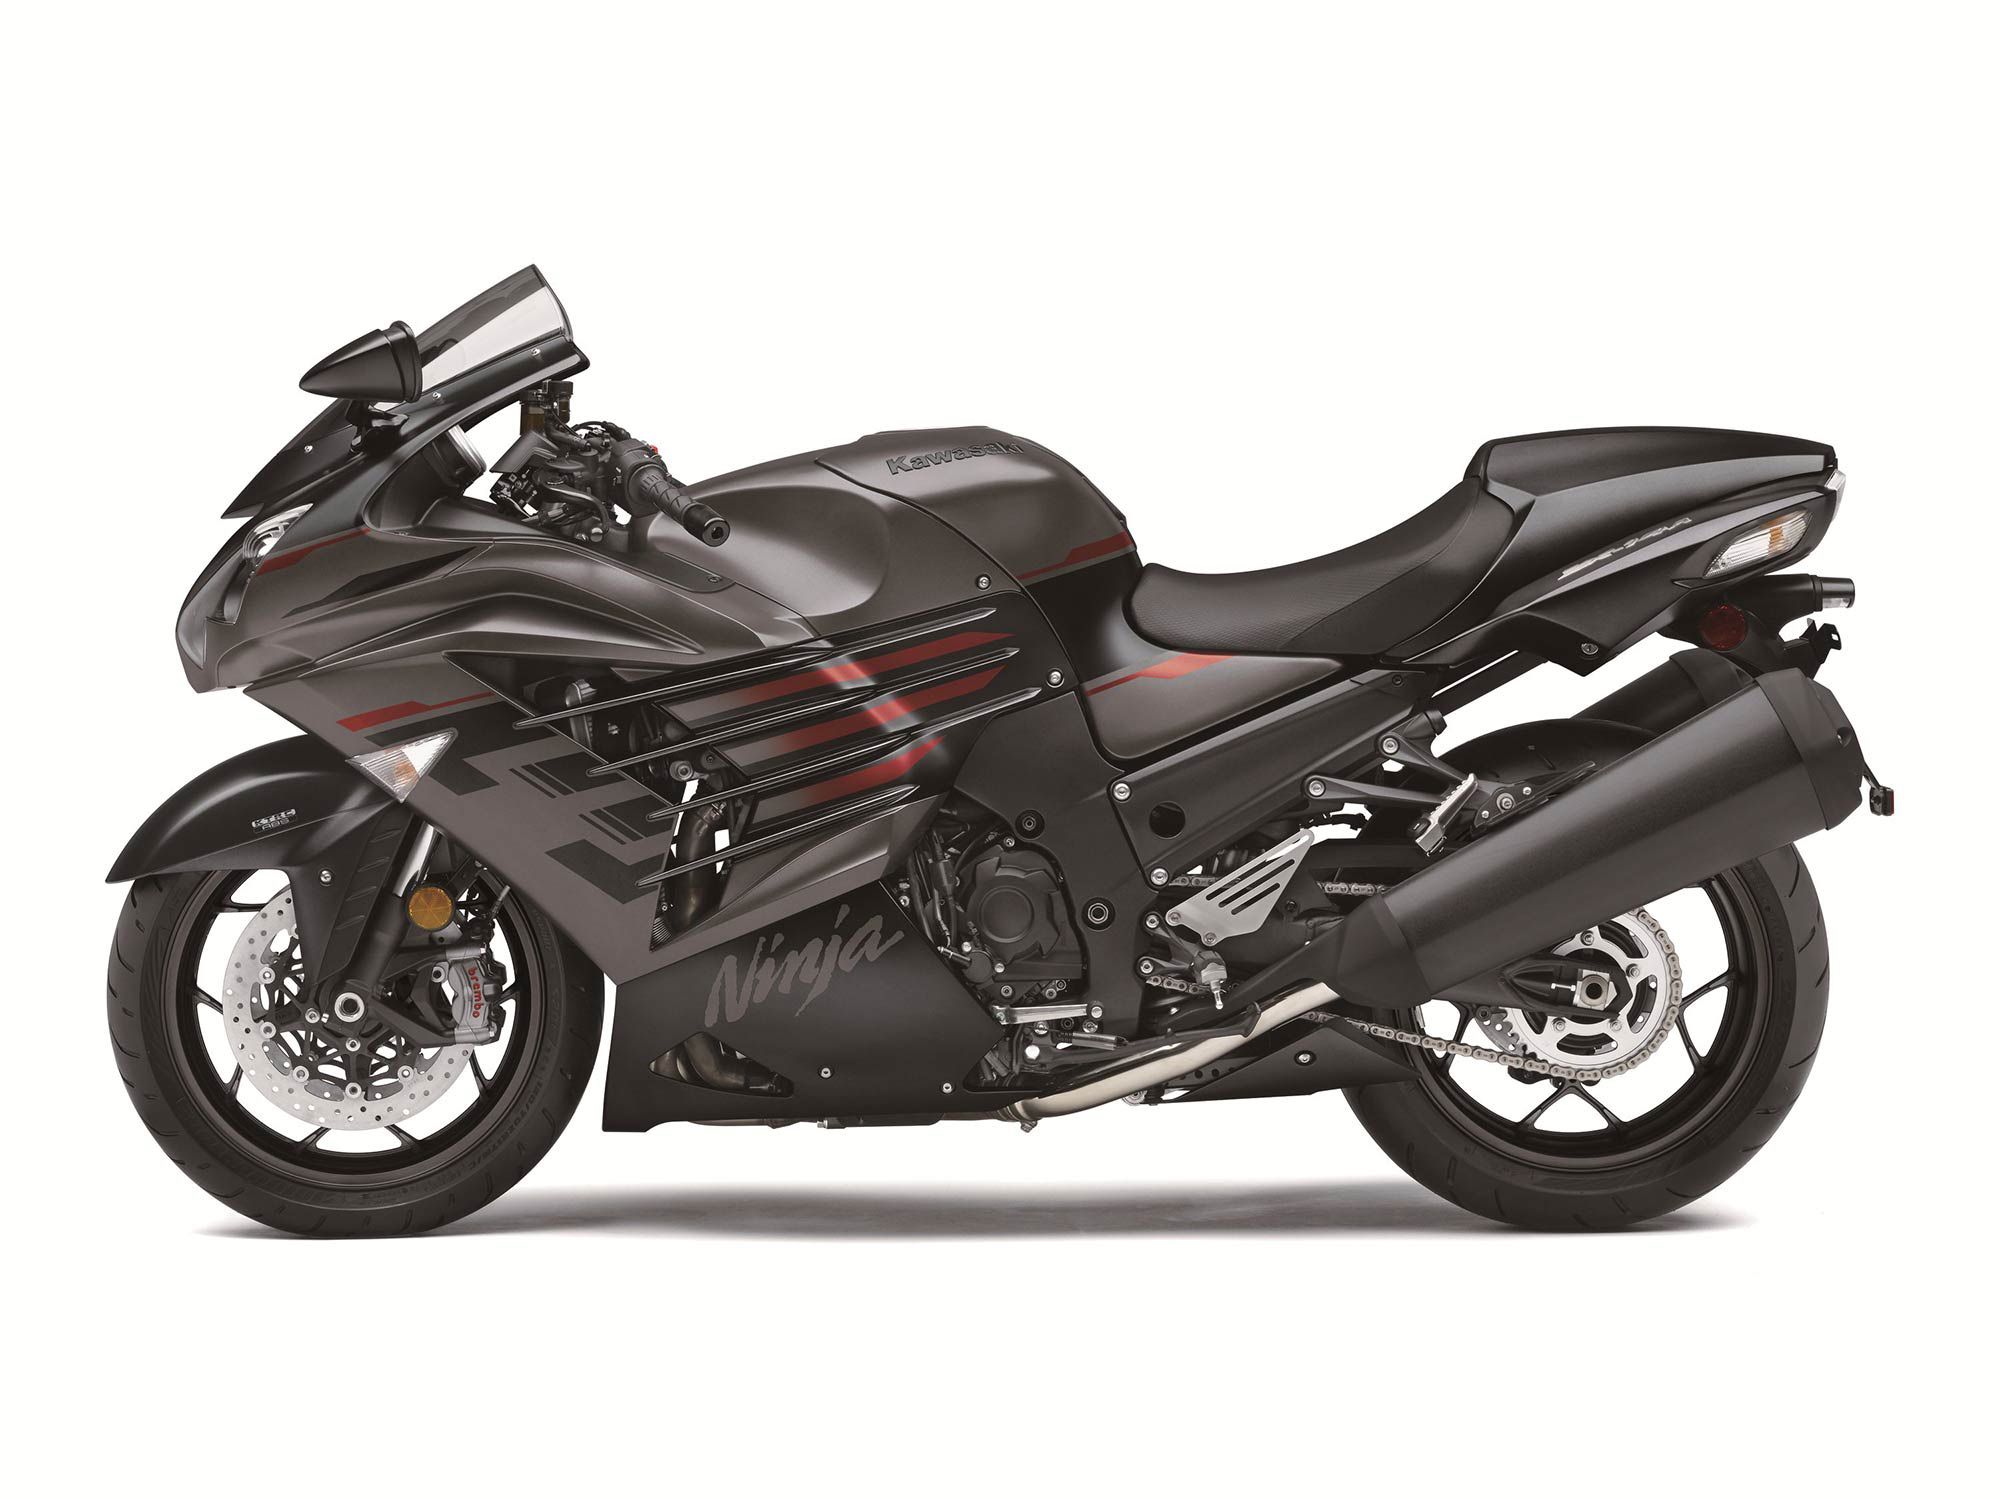 The ZX-14R is still available in only one colorway: Metallic Matte Graphenesteel Gray/Flat Ebony.